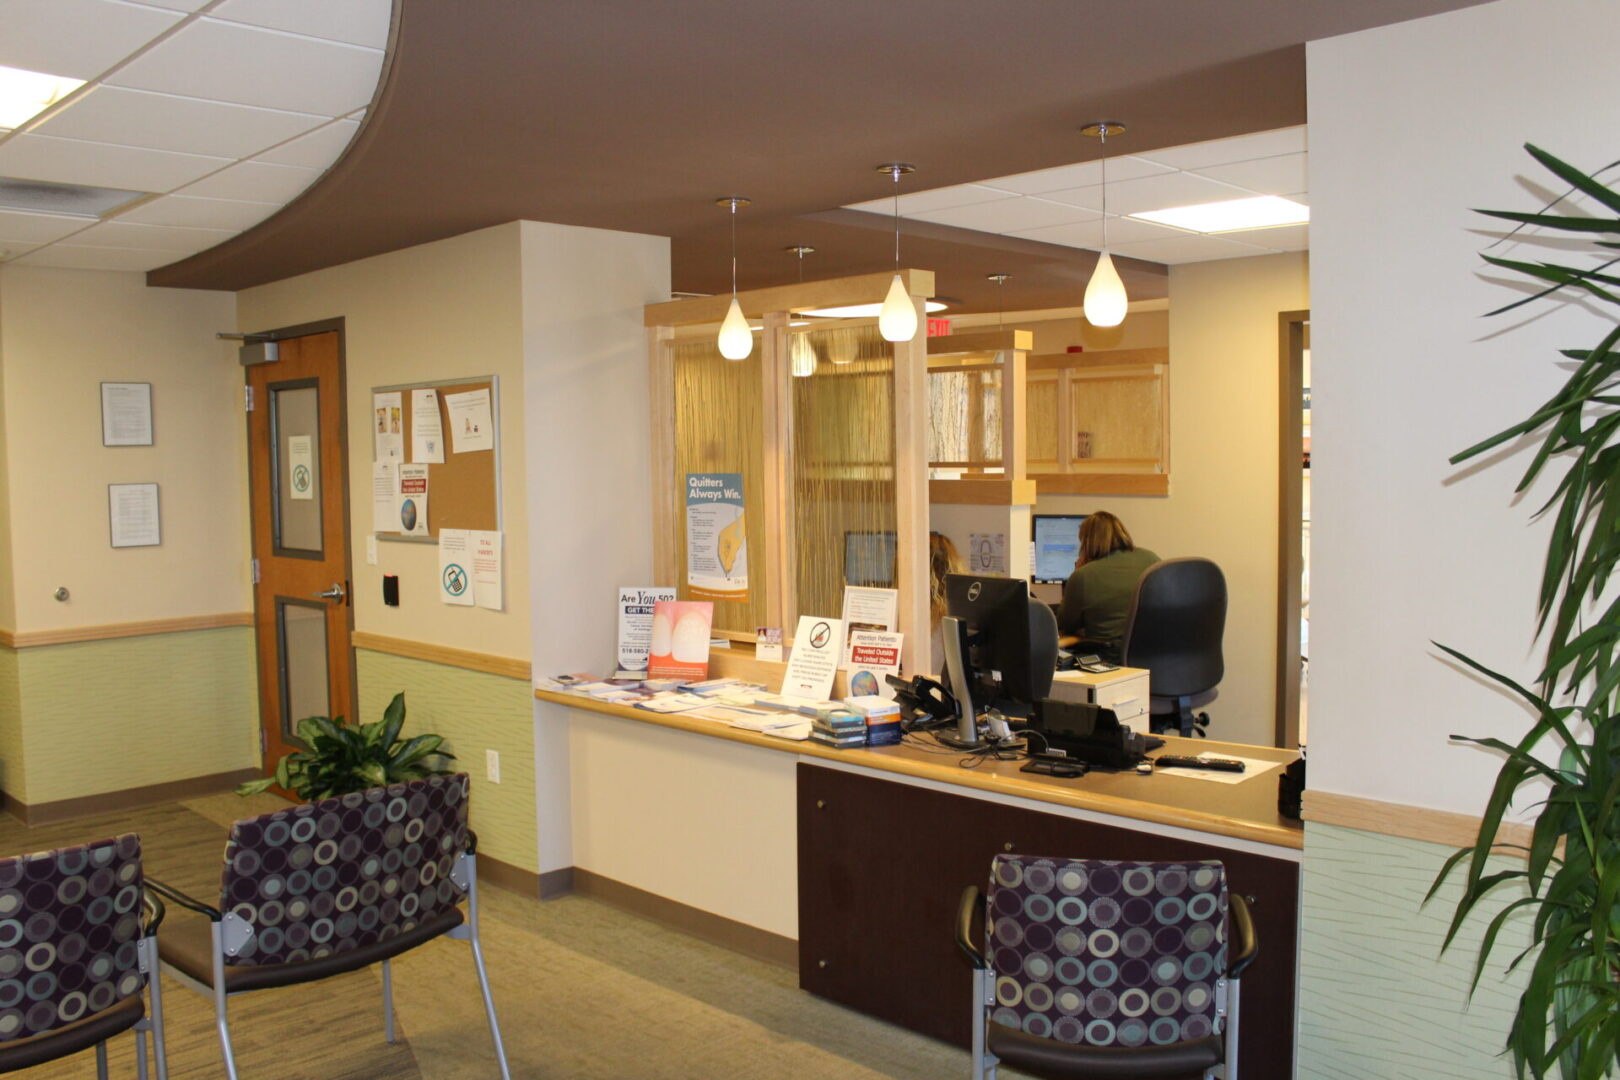 A view of the front desk and reception area.